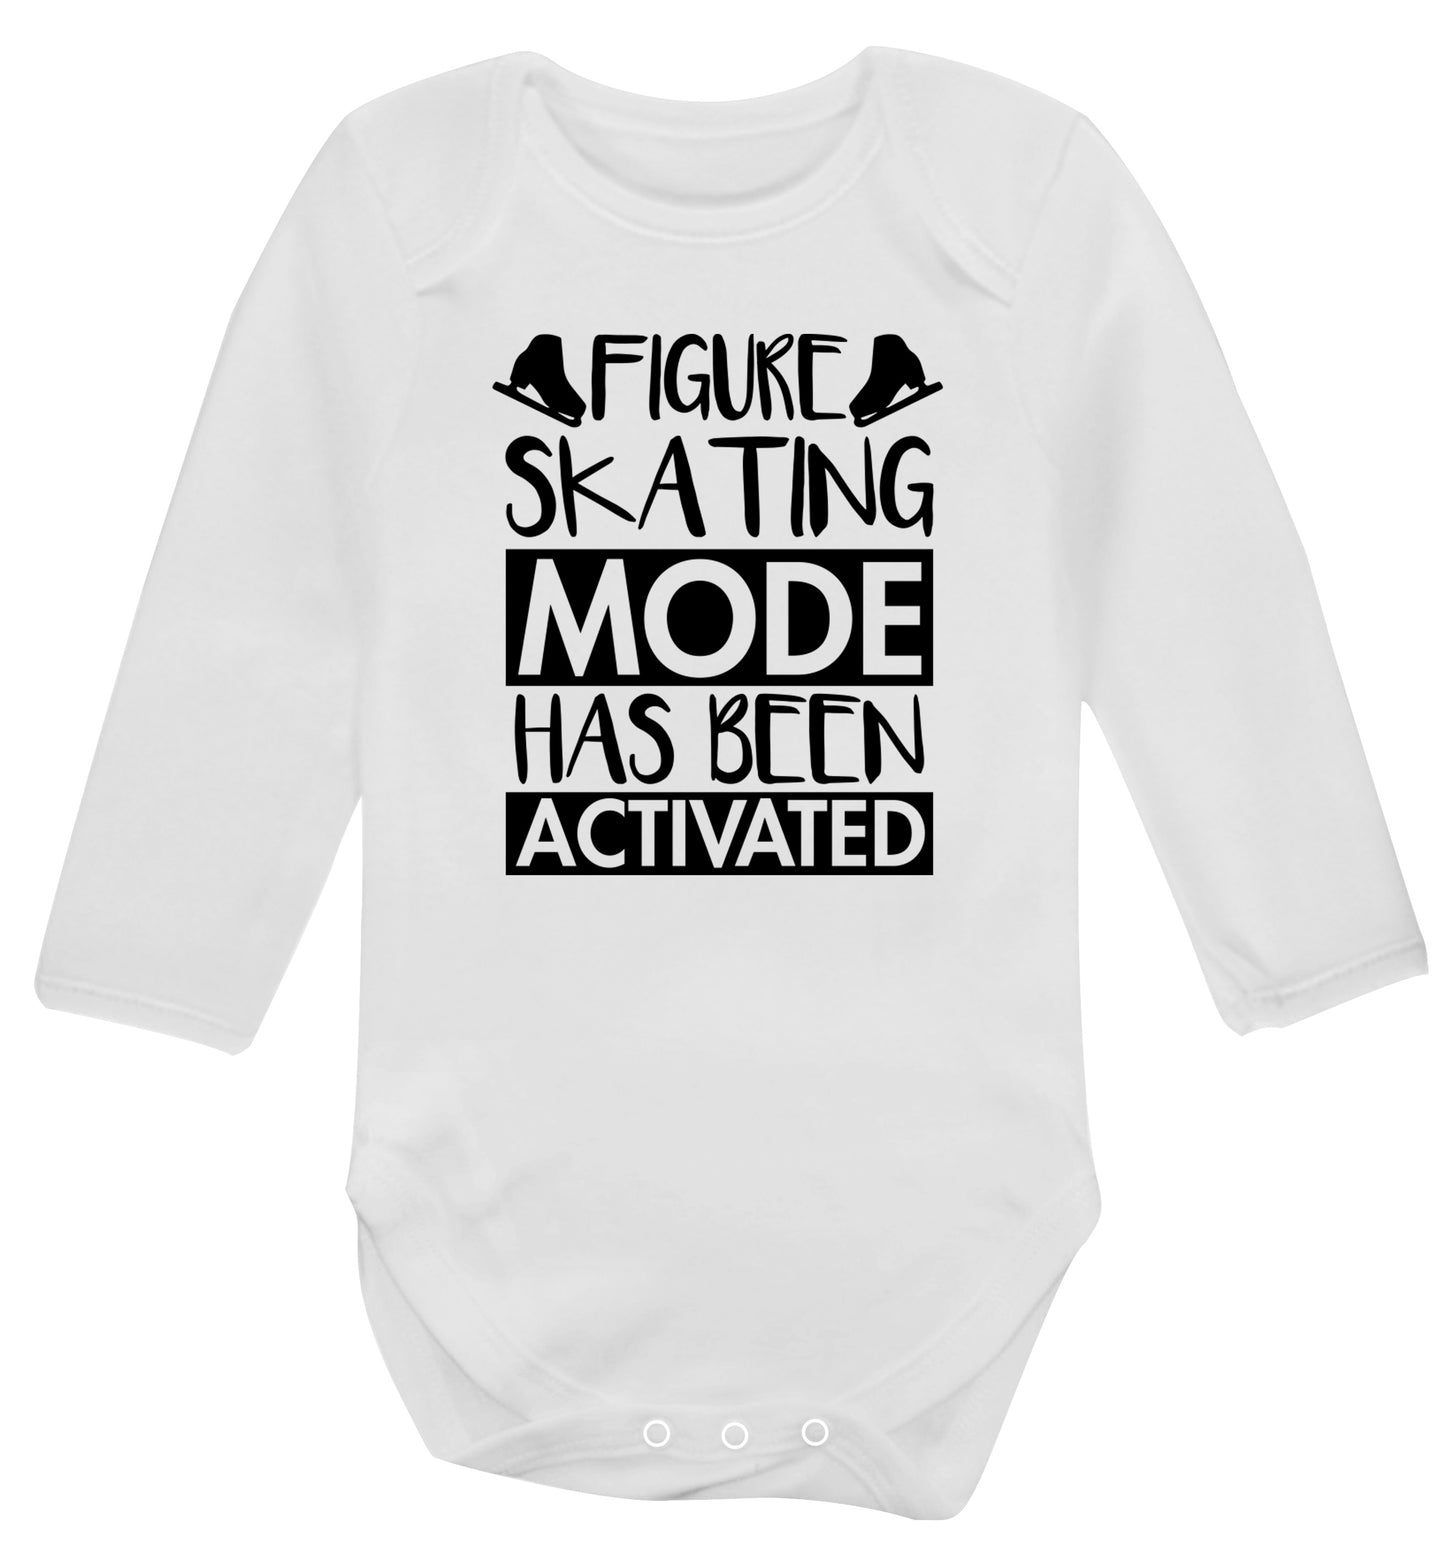 Figure skating mode activated Baby Vest long sleeved white 6-12 months